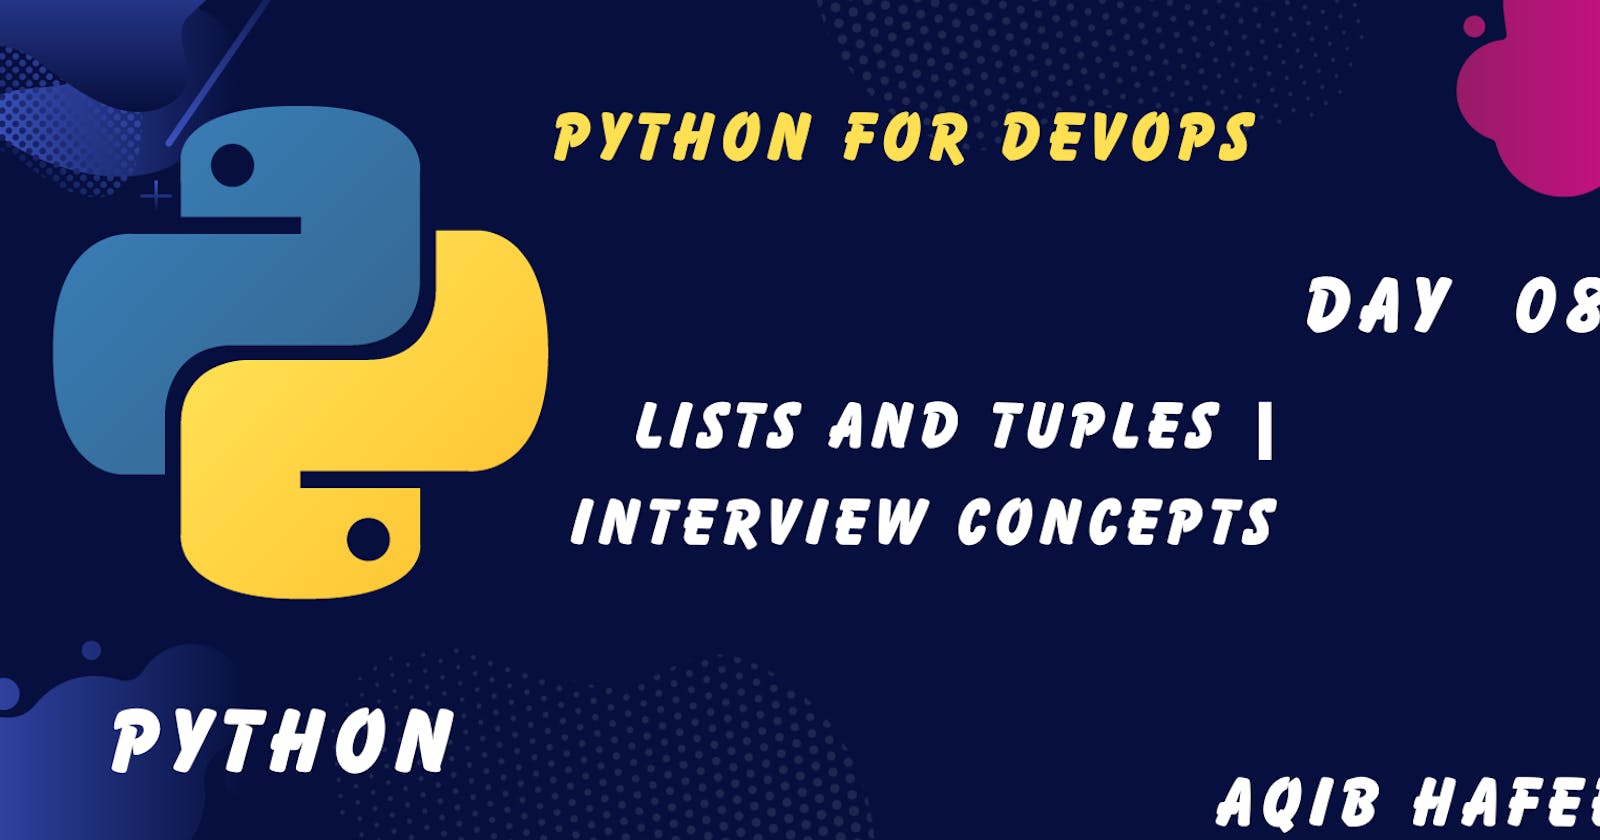 Day 08: Lists and Tuples in Python for DevOps